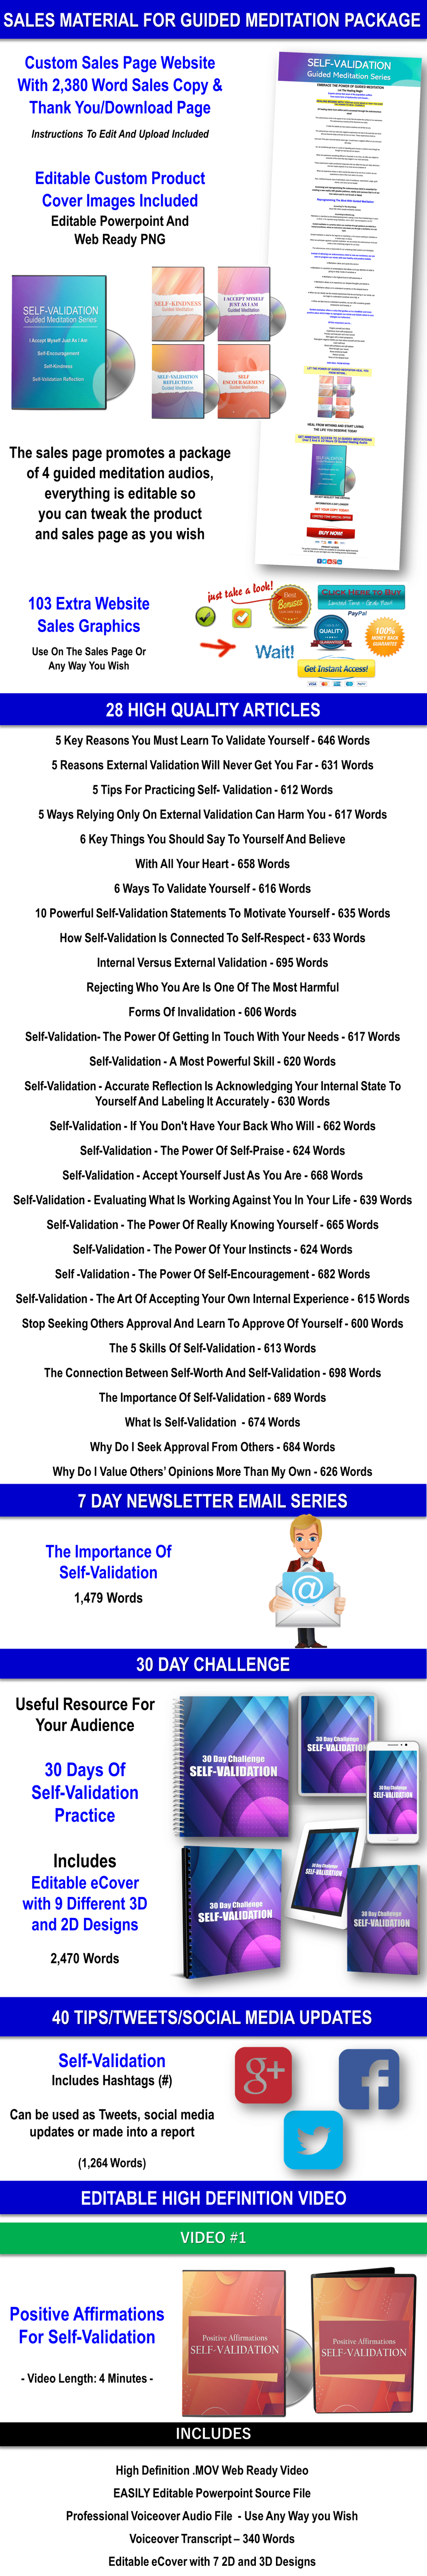 Self-Validation: 340 Affirmations And Guided Meditations Giant Content Pack PLR Rights